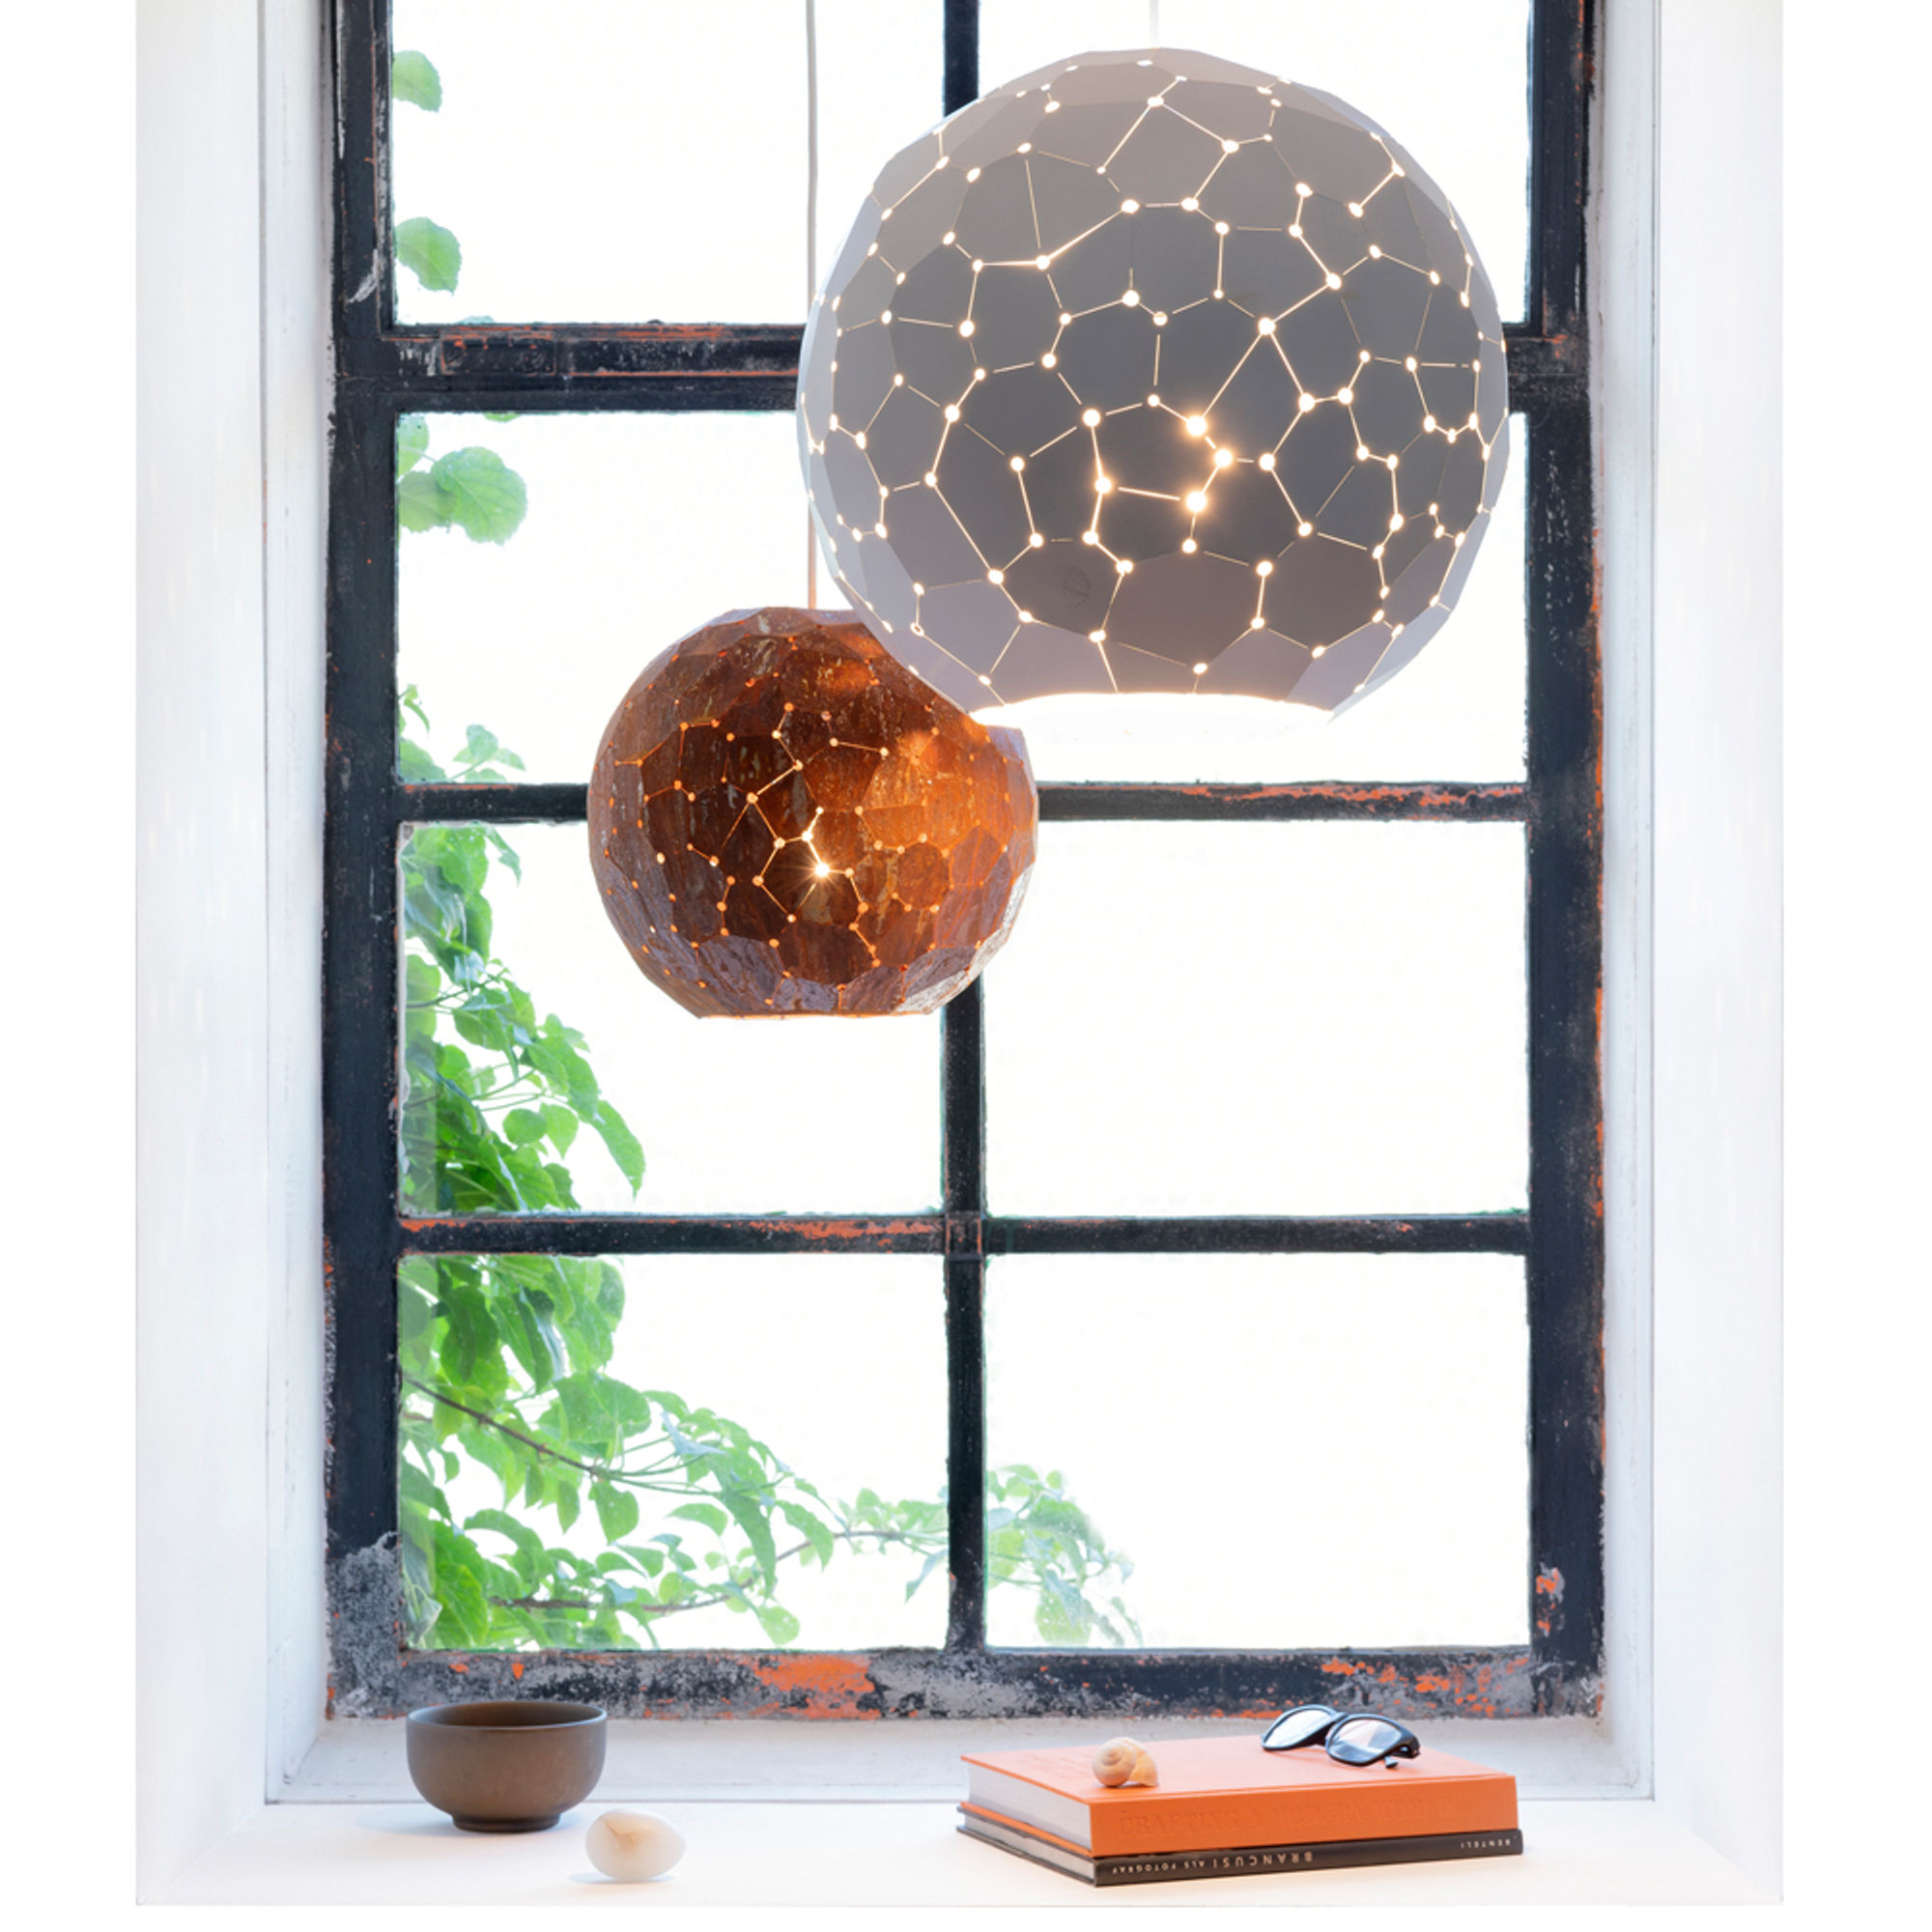 The StarDust 60 Pendant by By Marc de Groot 1